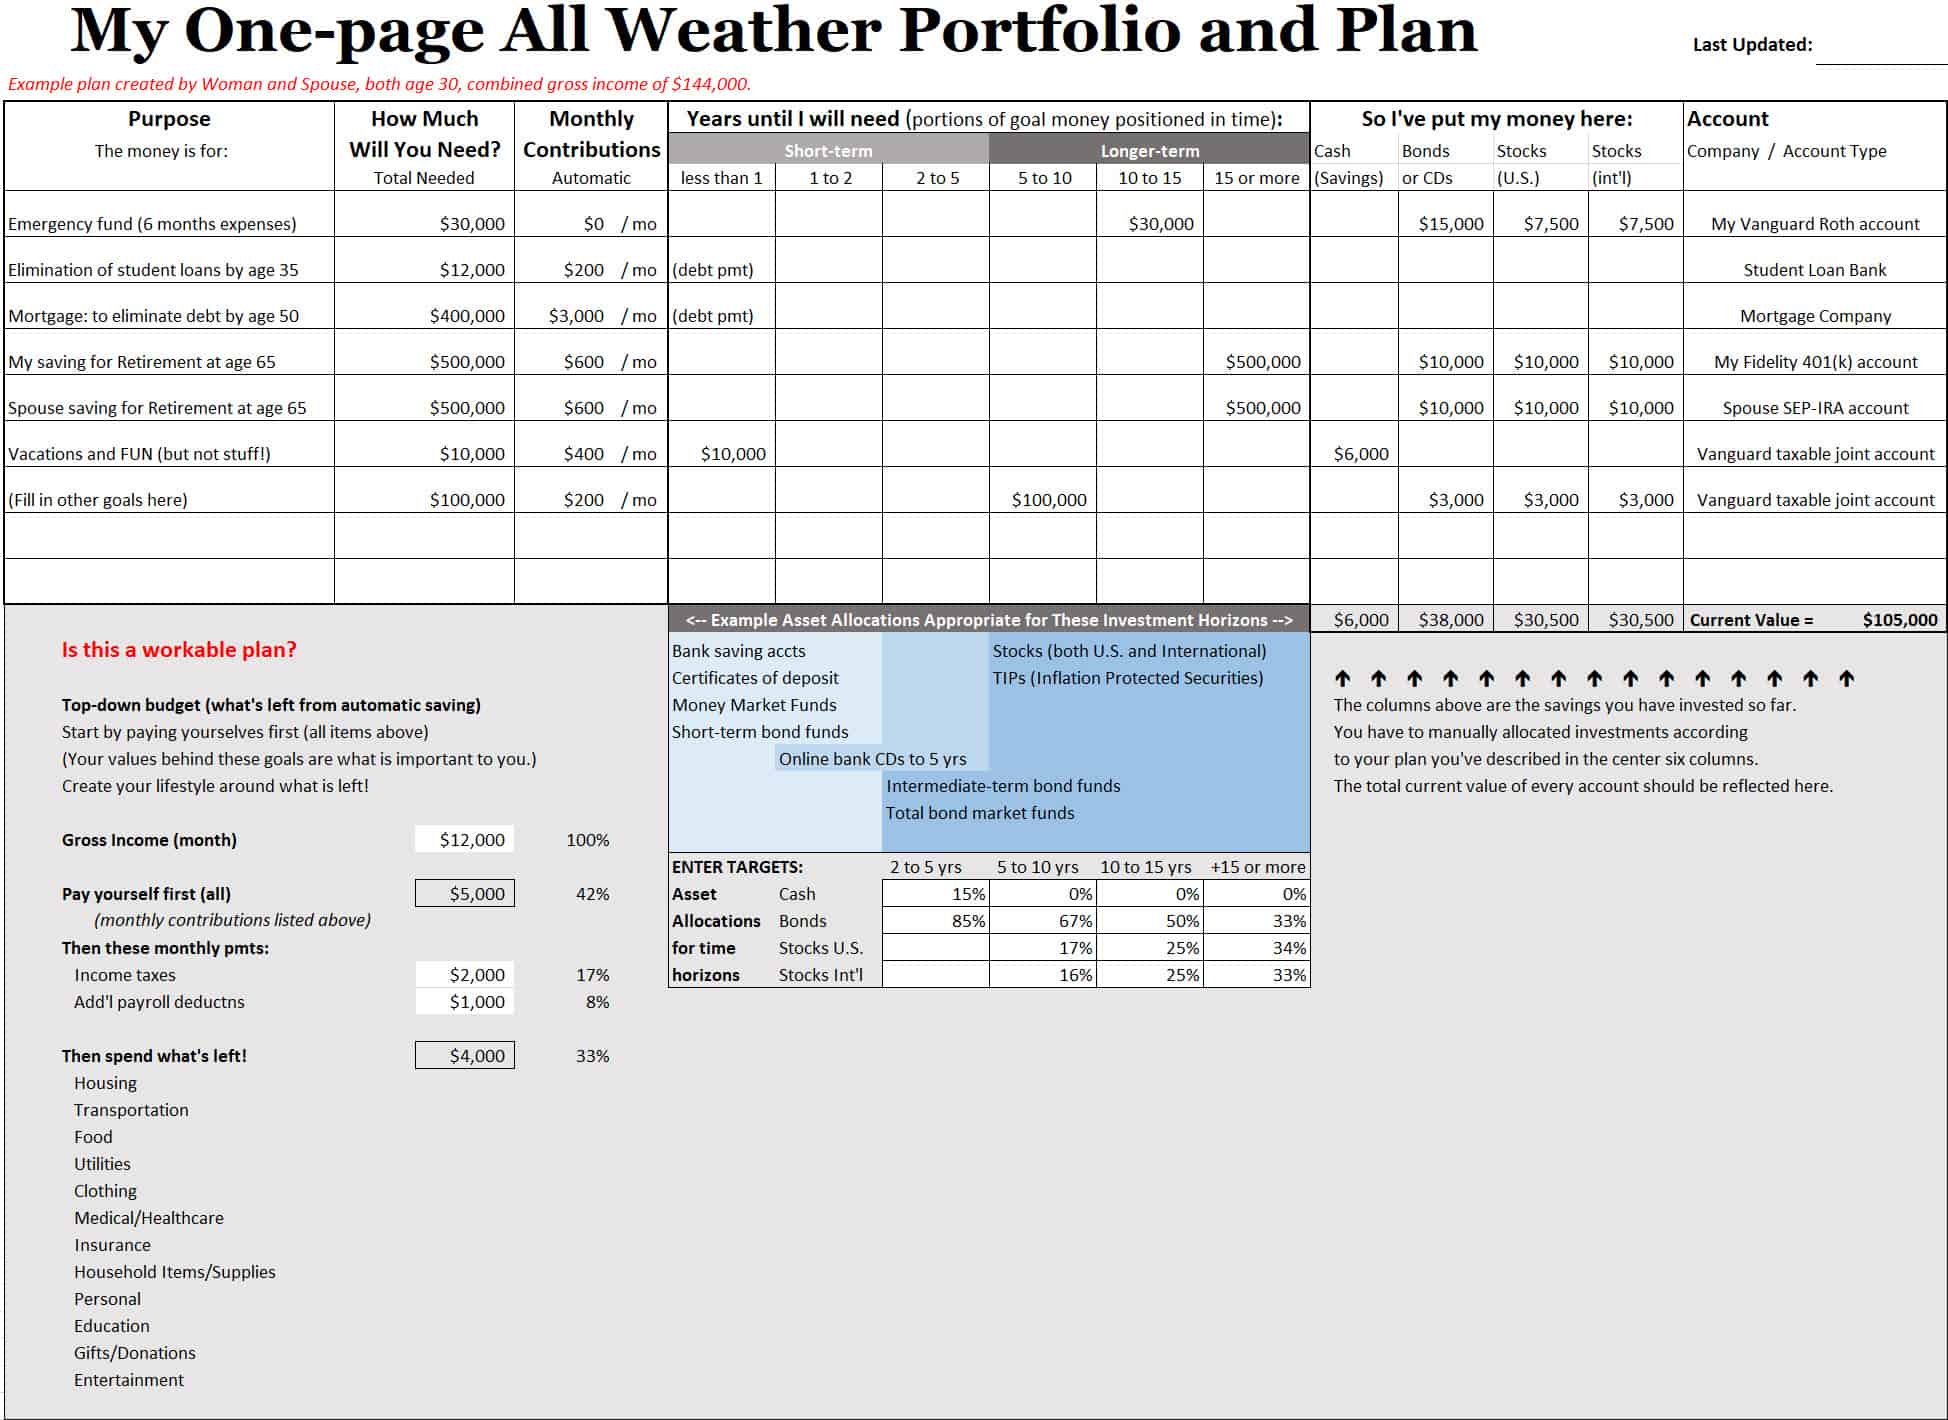 How To Build An All Weather Portfolio In 9 Steps Financinglife Org